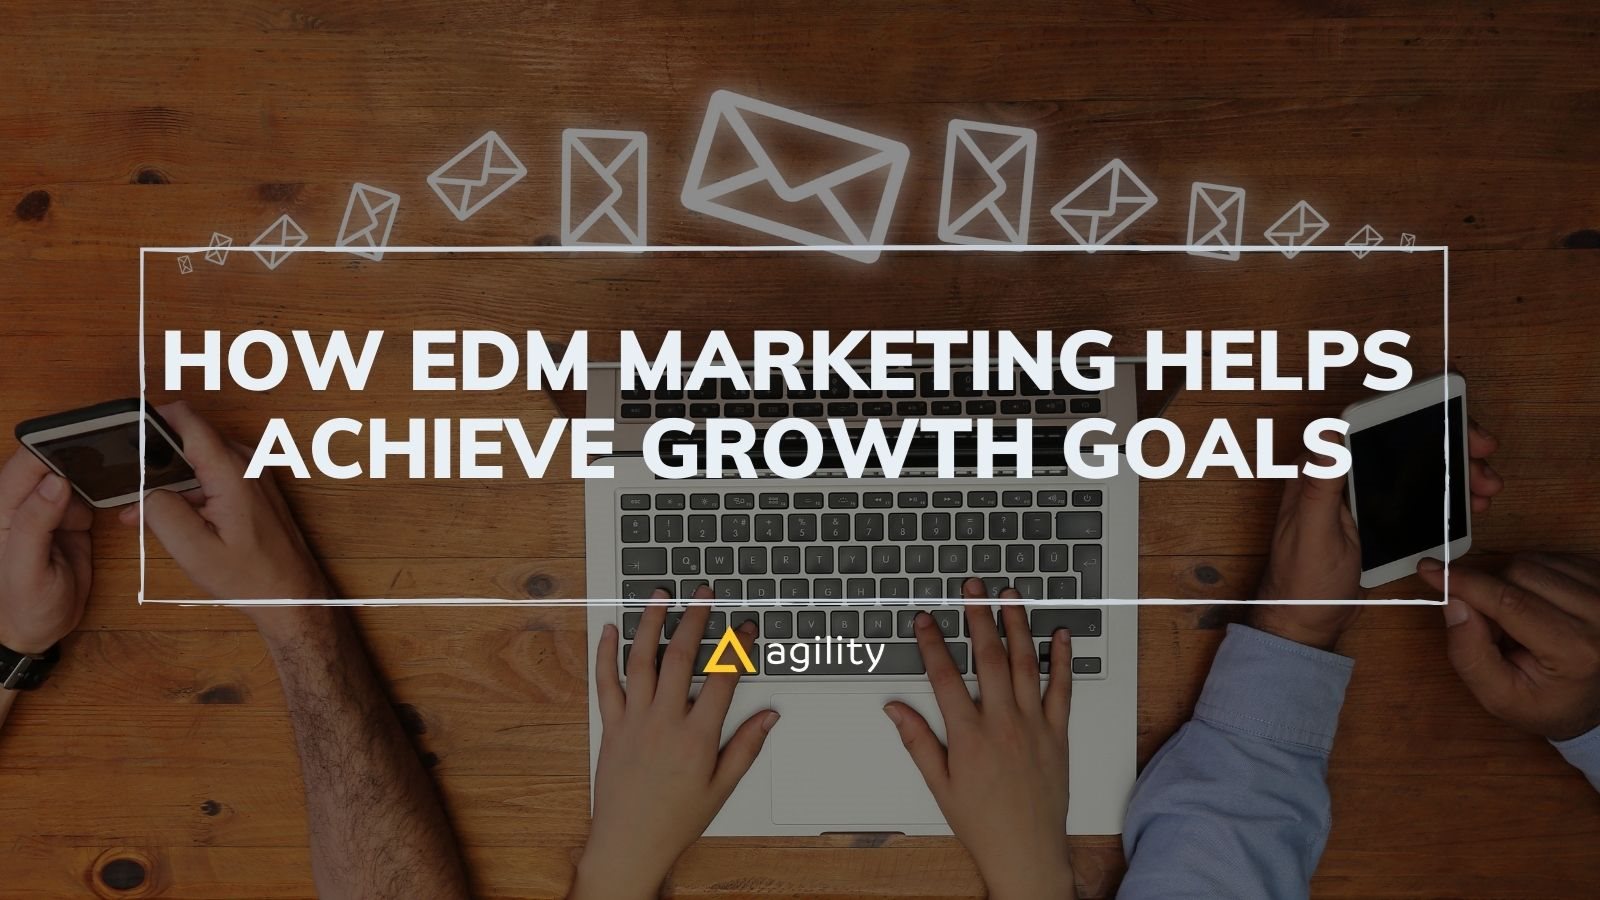 How EDM Marketing Helps to Achieve Growth Goals